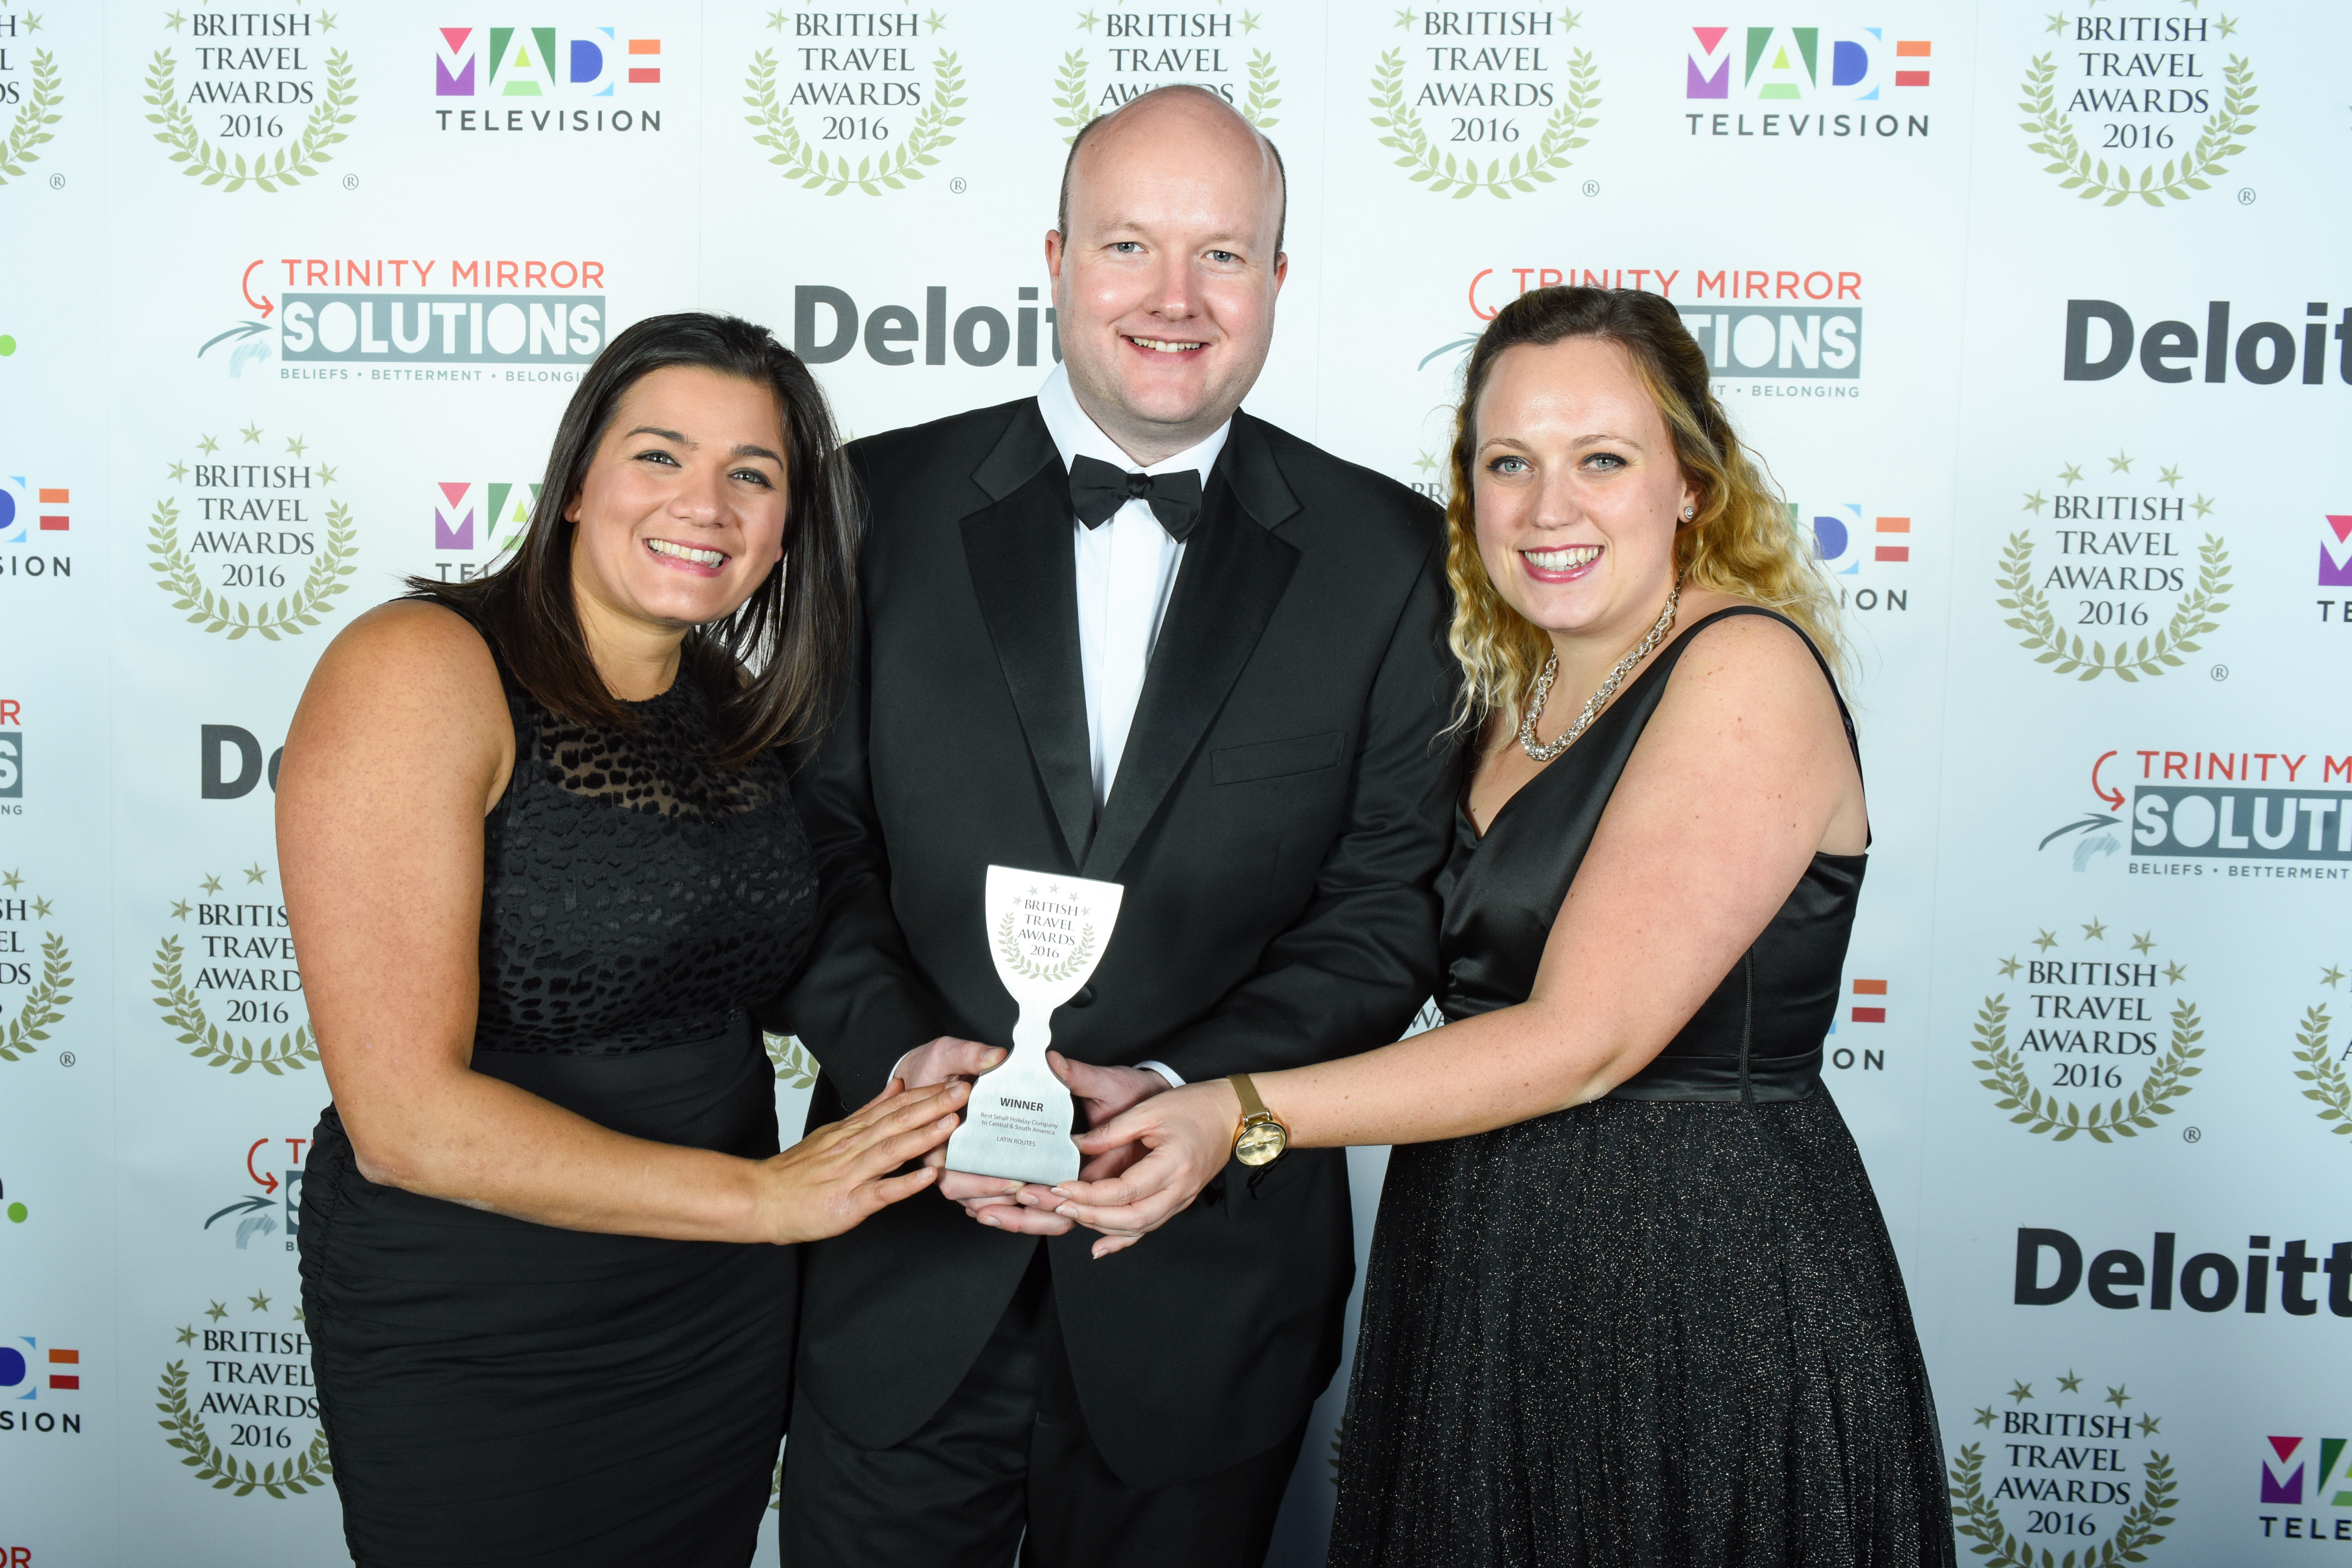 Latin Routes, Best Small Holiday Company Latin and South America British Travel Awards 2016. Photo by Steve Dunlop steve@stevedunlop.com